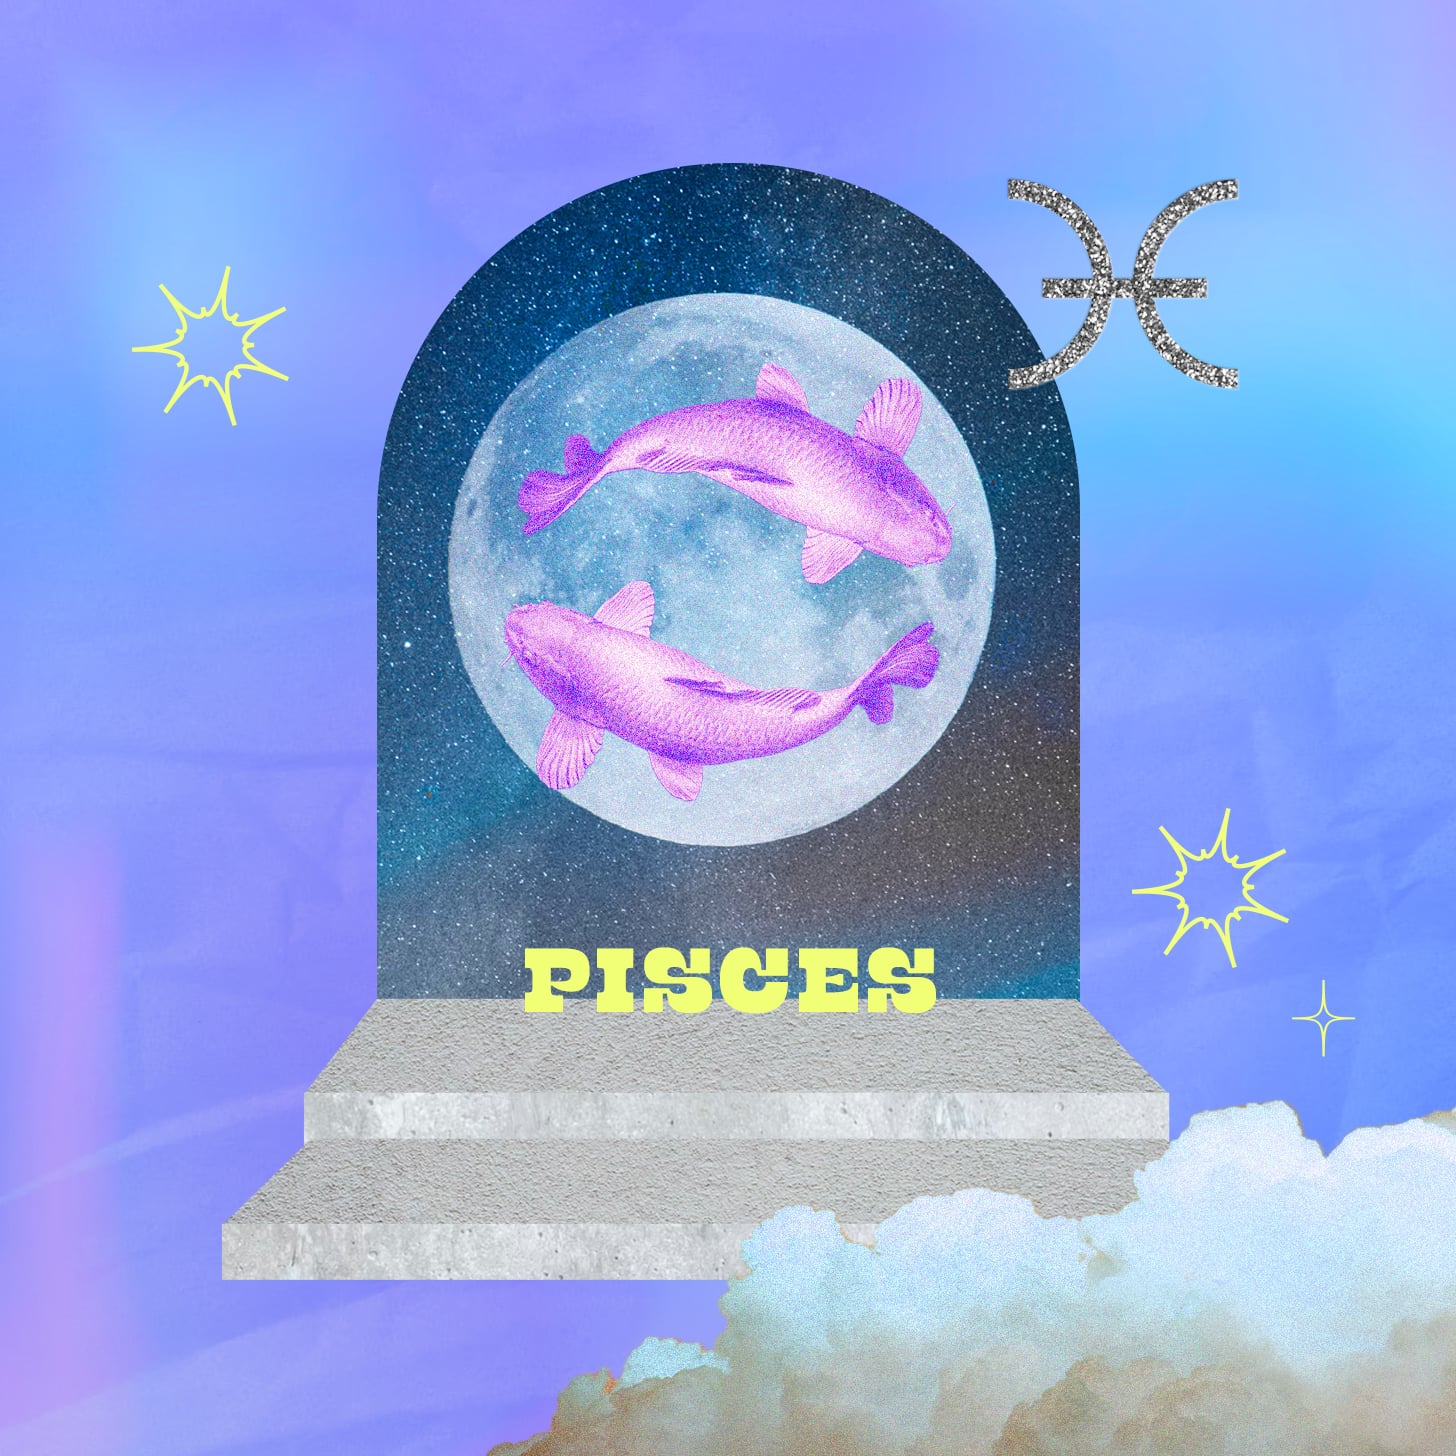 Pisces weekly horoscope for week of August 28, 2022